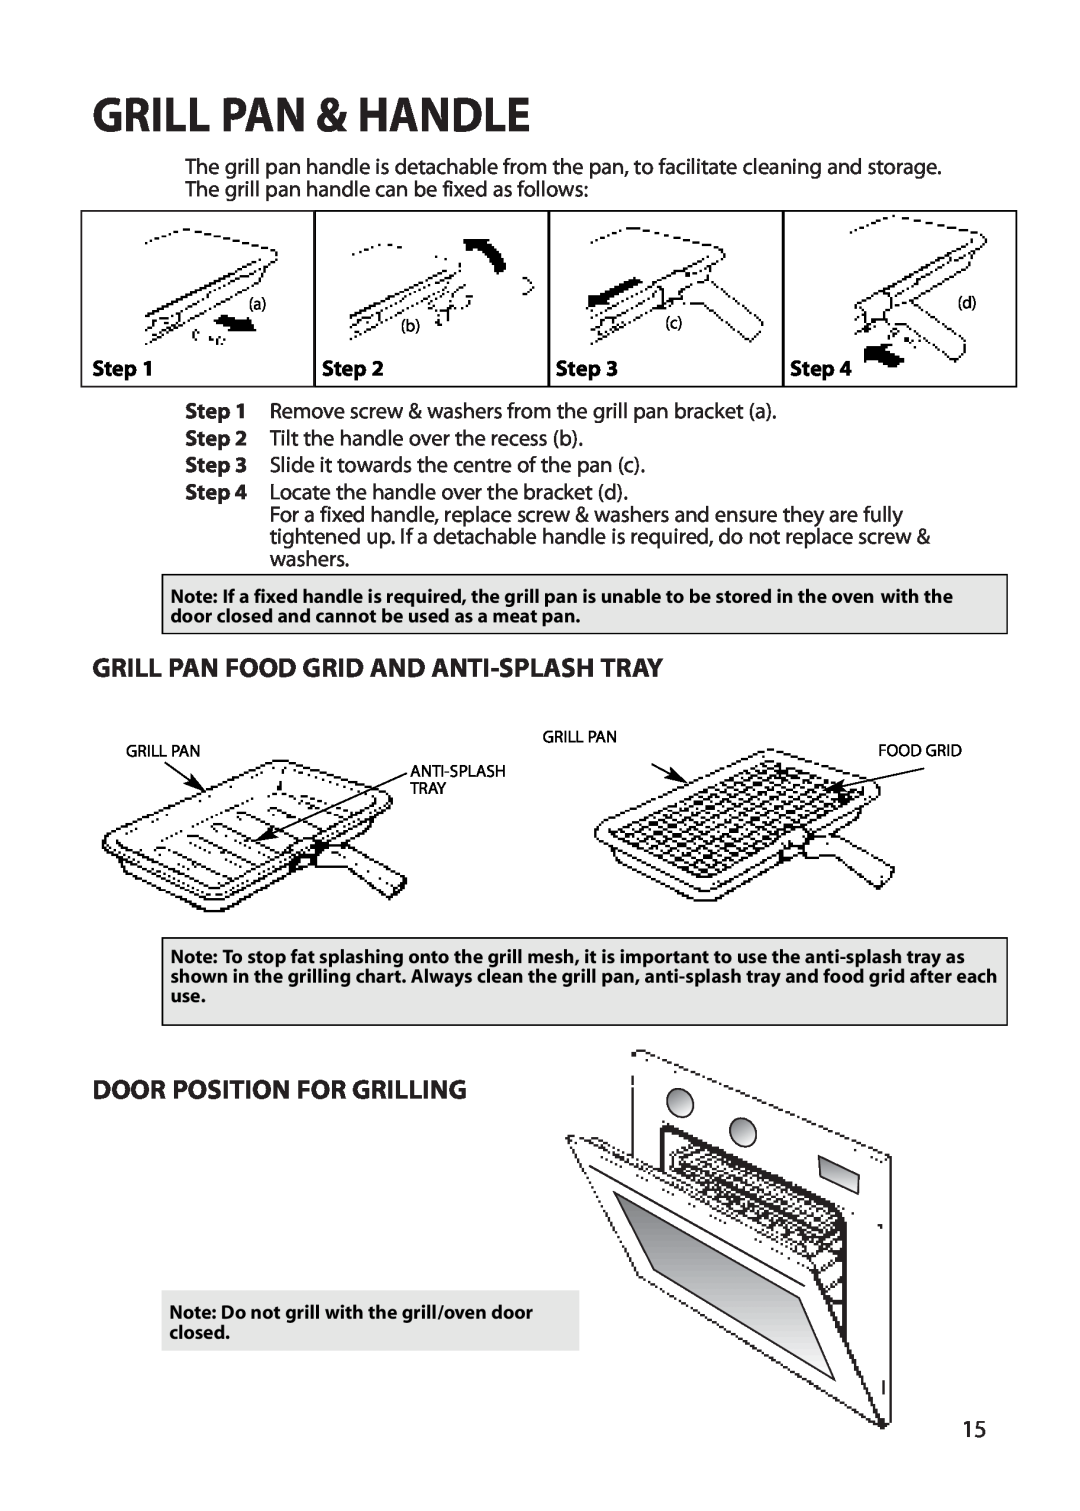 Creda REFLECTION manual Grill Pan & Handle, Grill Pan Food Grid And Anti-Splashtray, Door Position For Grilling, Step 